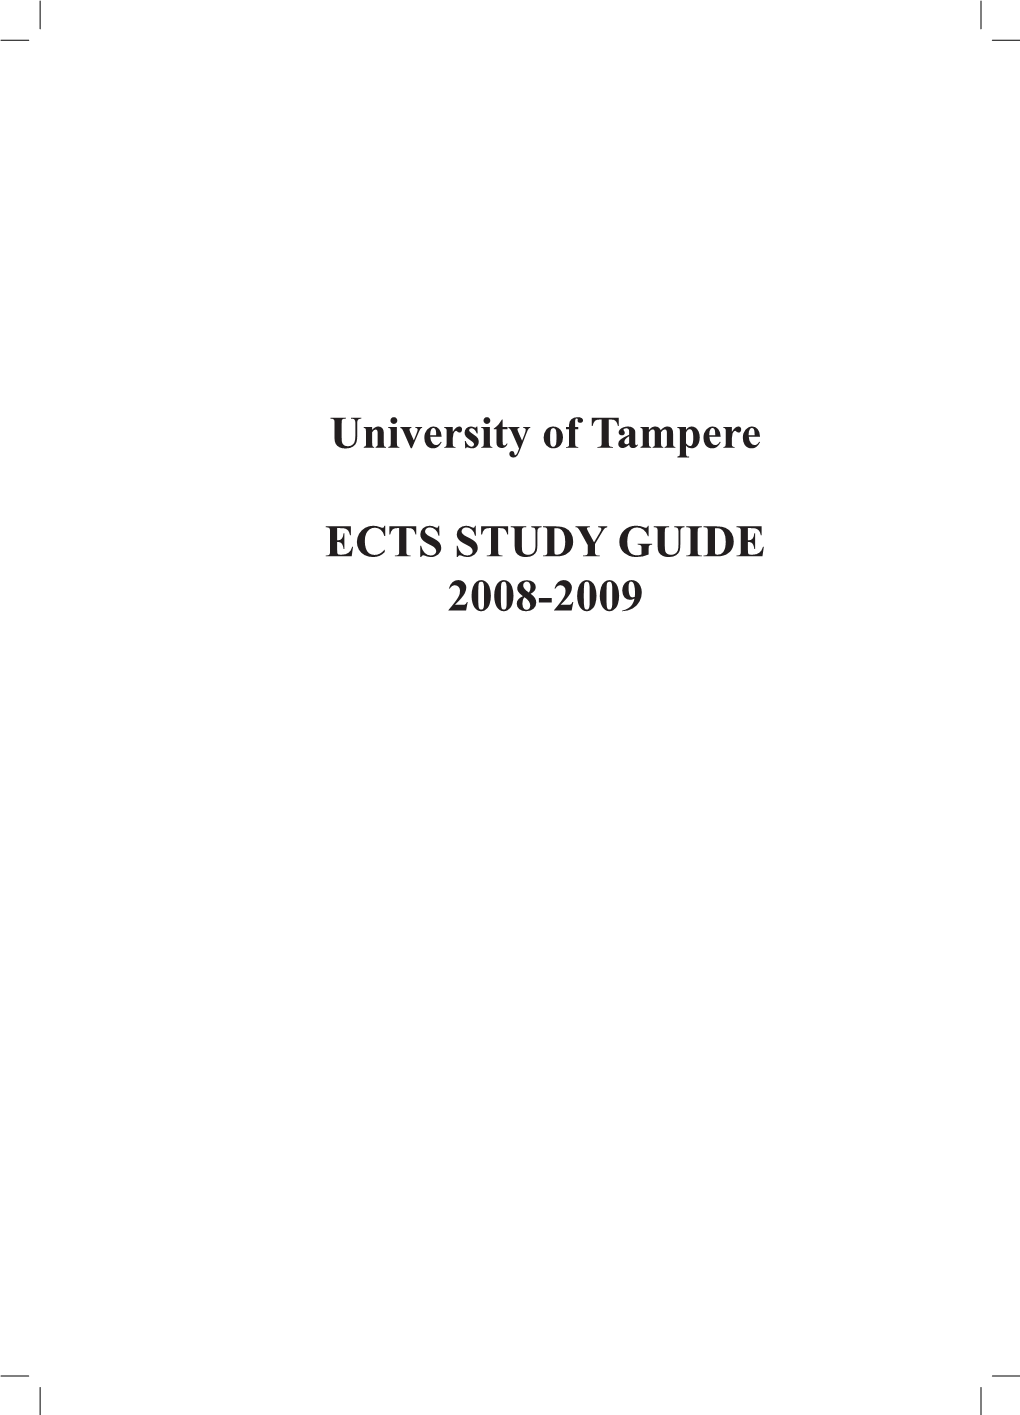 University of Tampere ECTS STUDY GUIDE 2008-2009